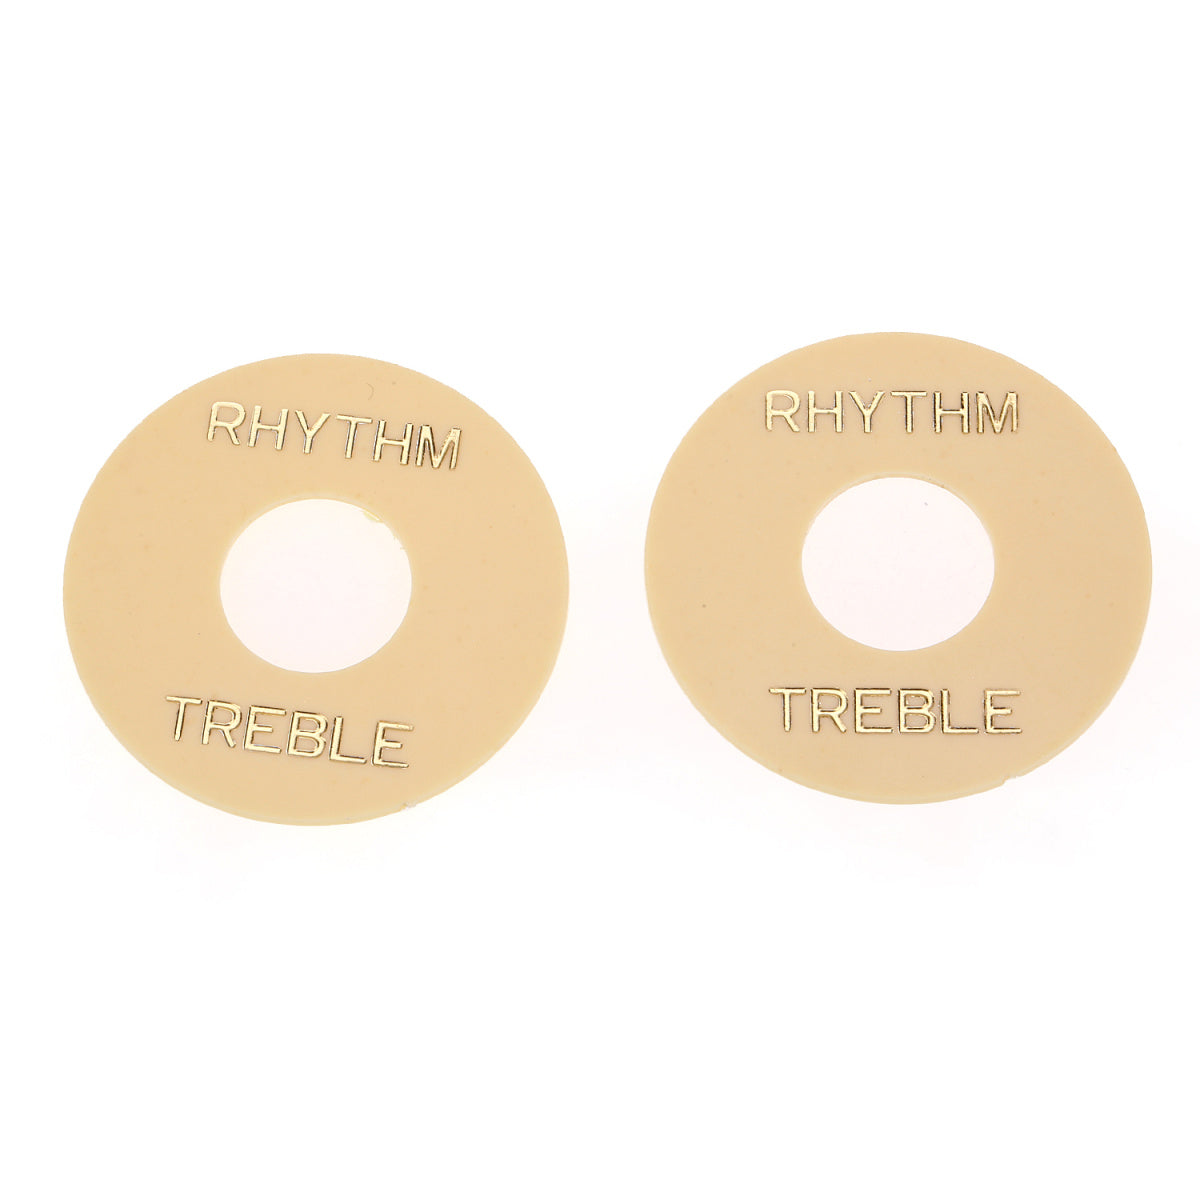 Musiclily Pro Self Adhesive Guitar Toggle Switch Plate LP Washer Rhythm Treble Ring, Cream with Gold Words (Set of 2)